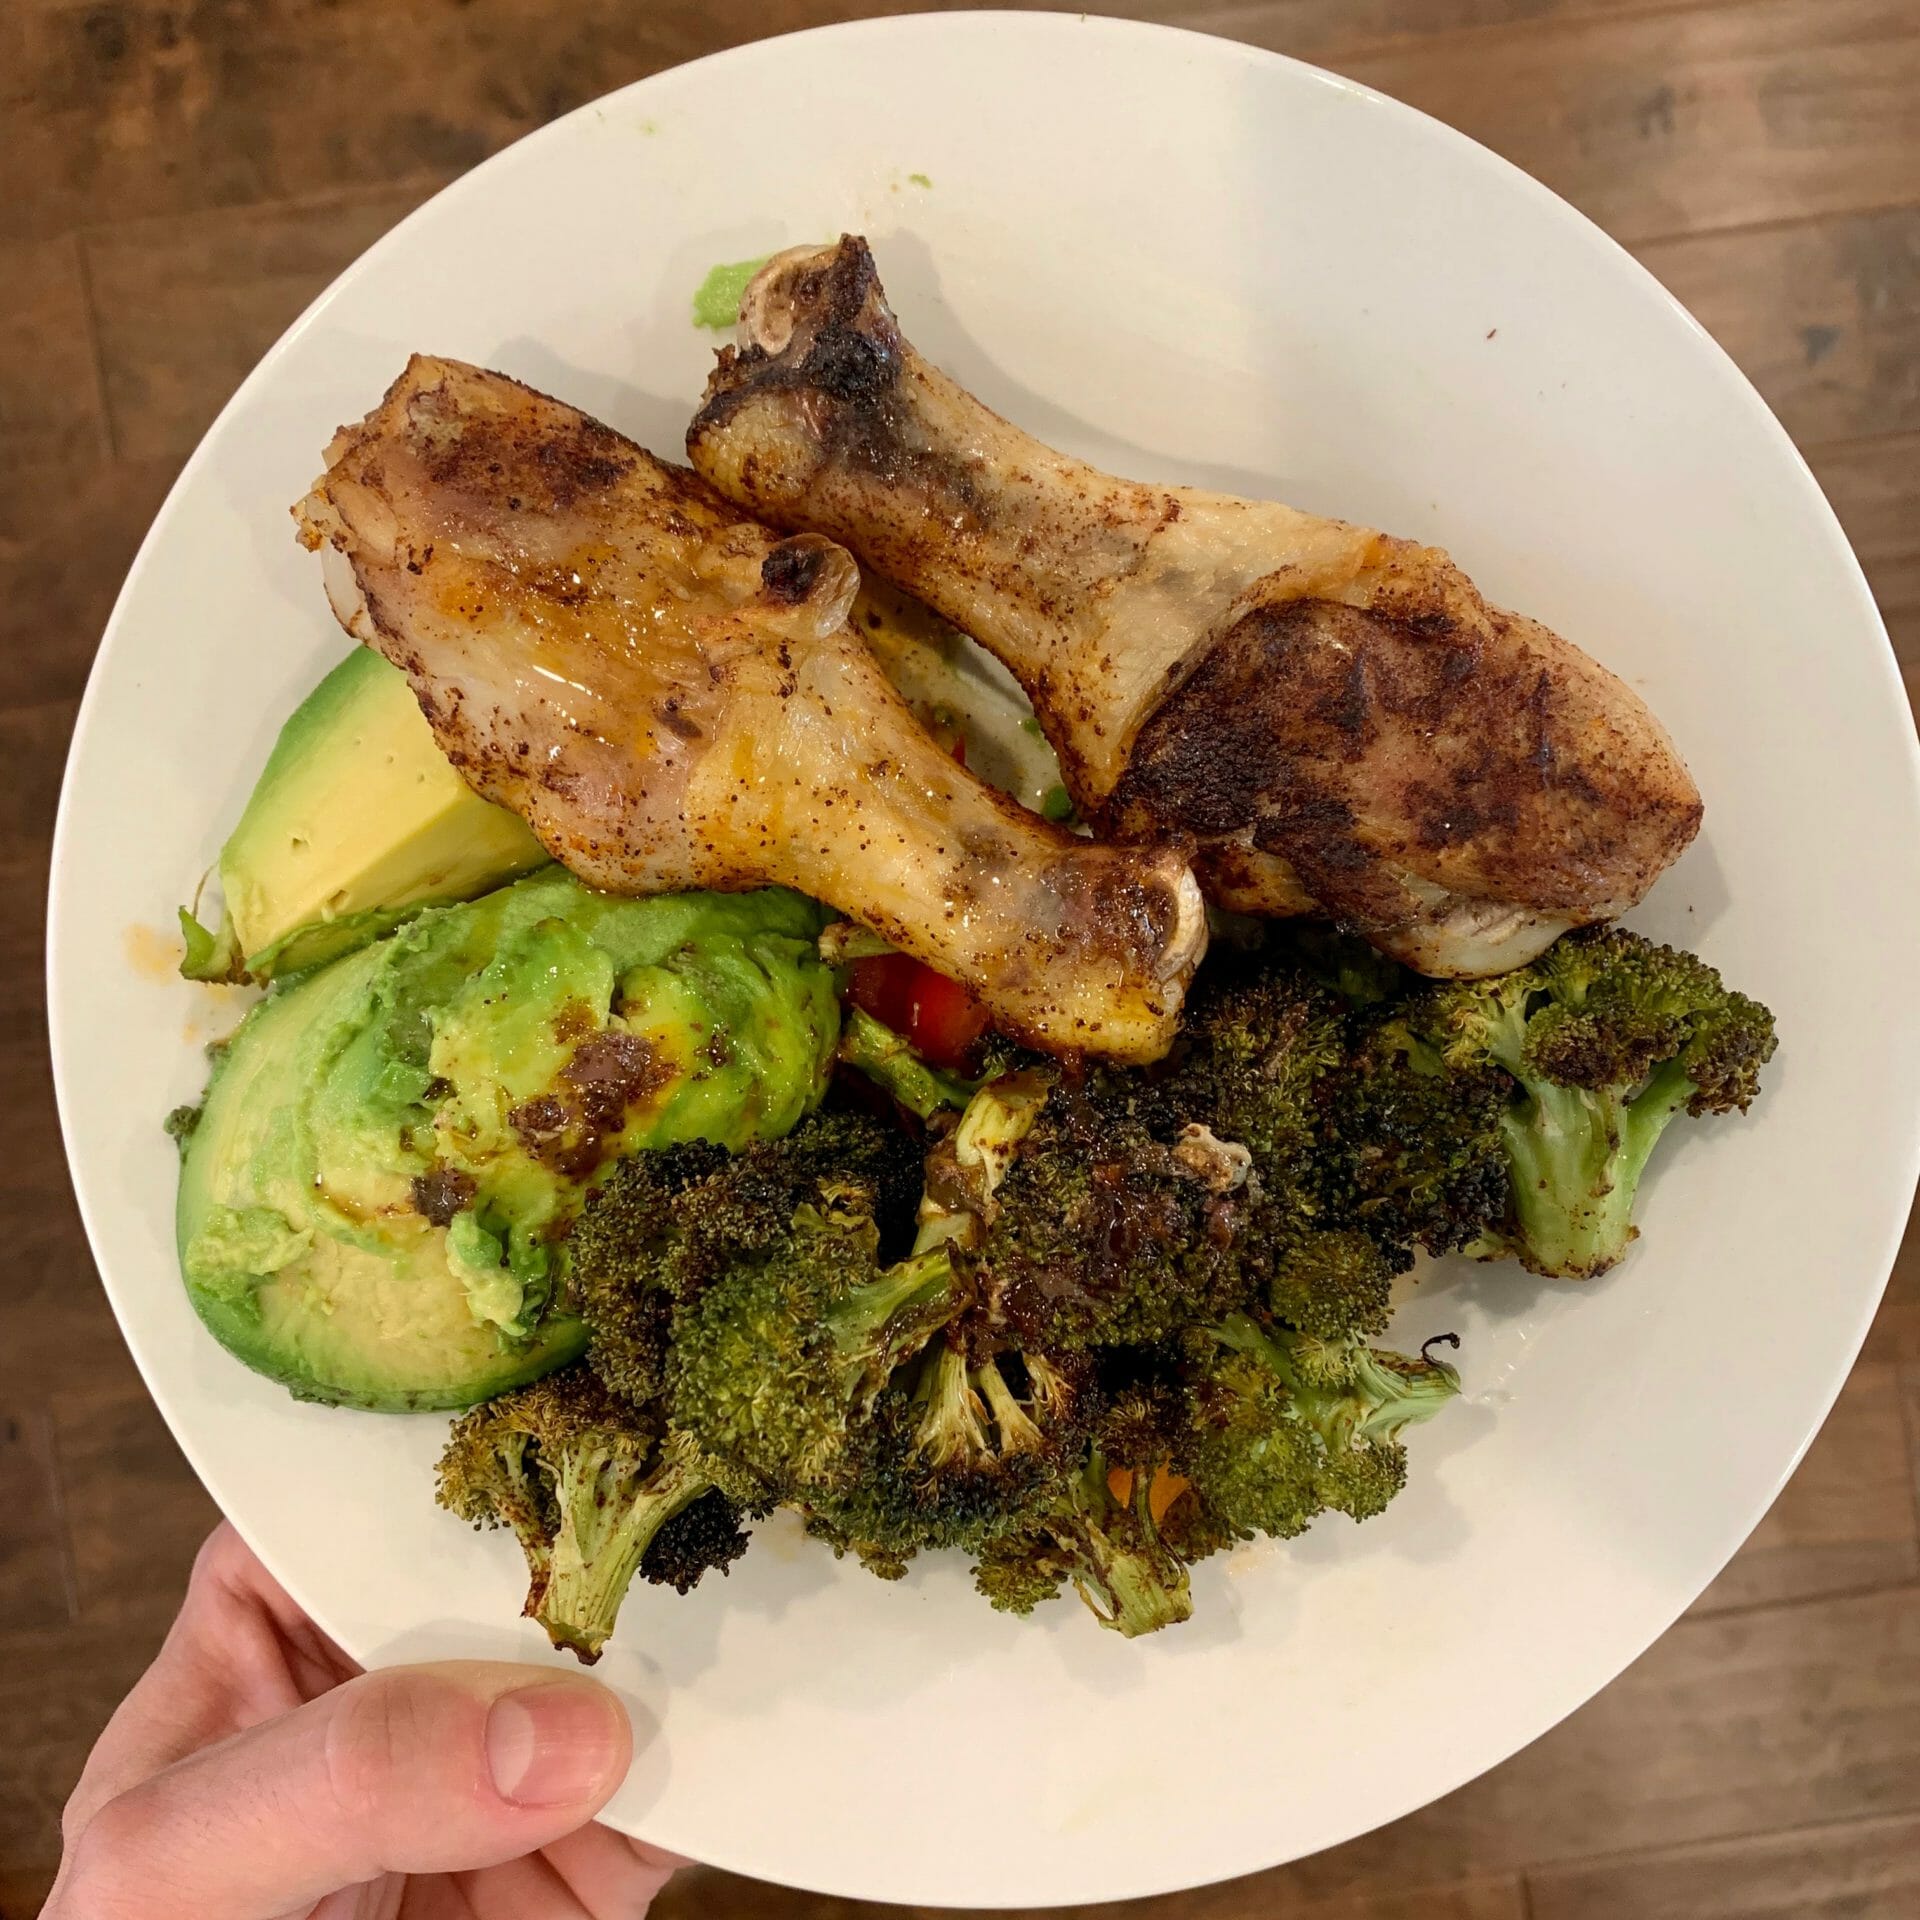 Chicken thighs with avocado and broccoli